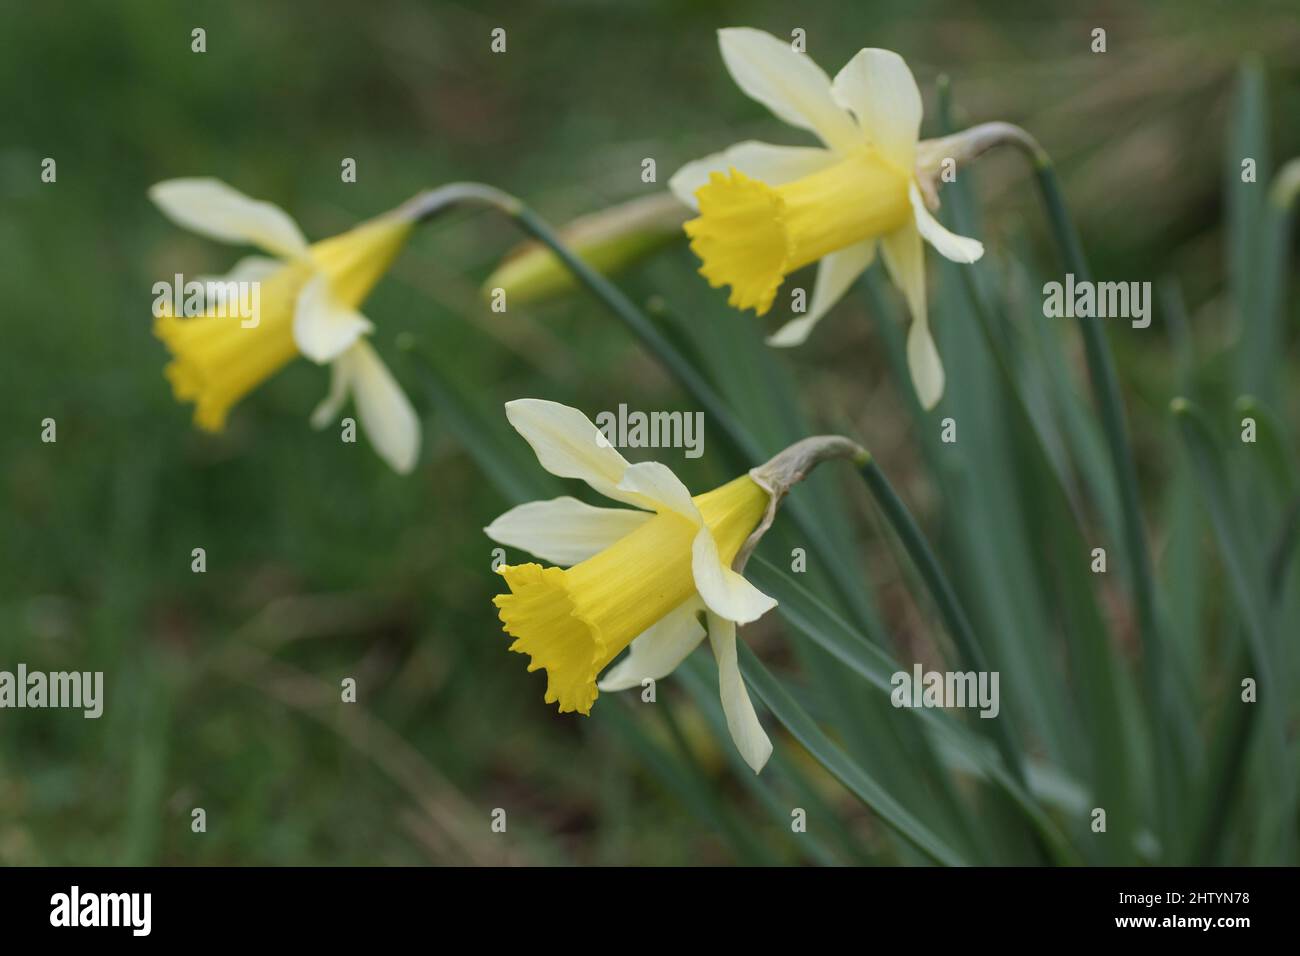 Flowers of the wild daffodil Narcissus pseudonarcissus Stock Photo